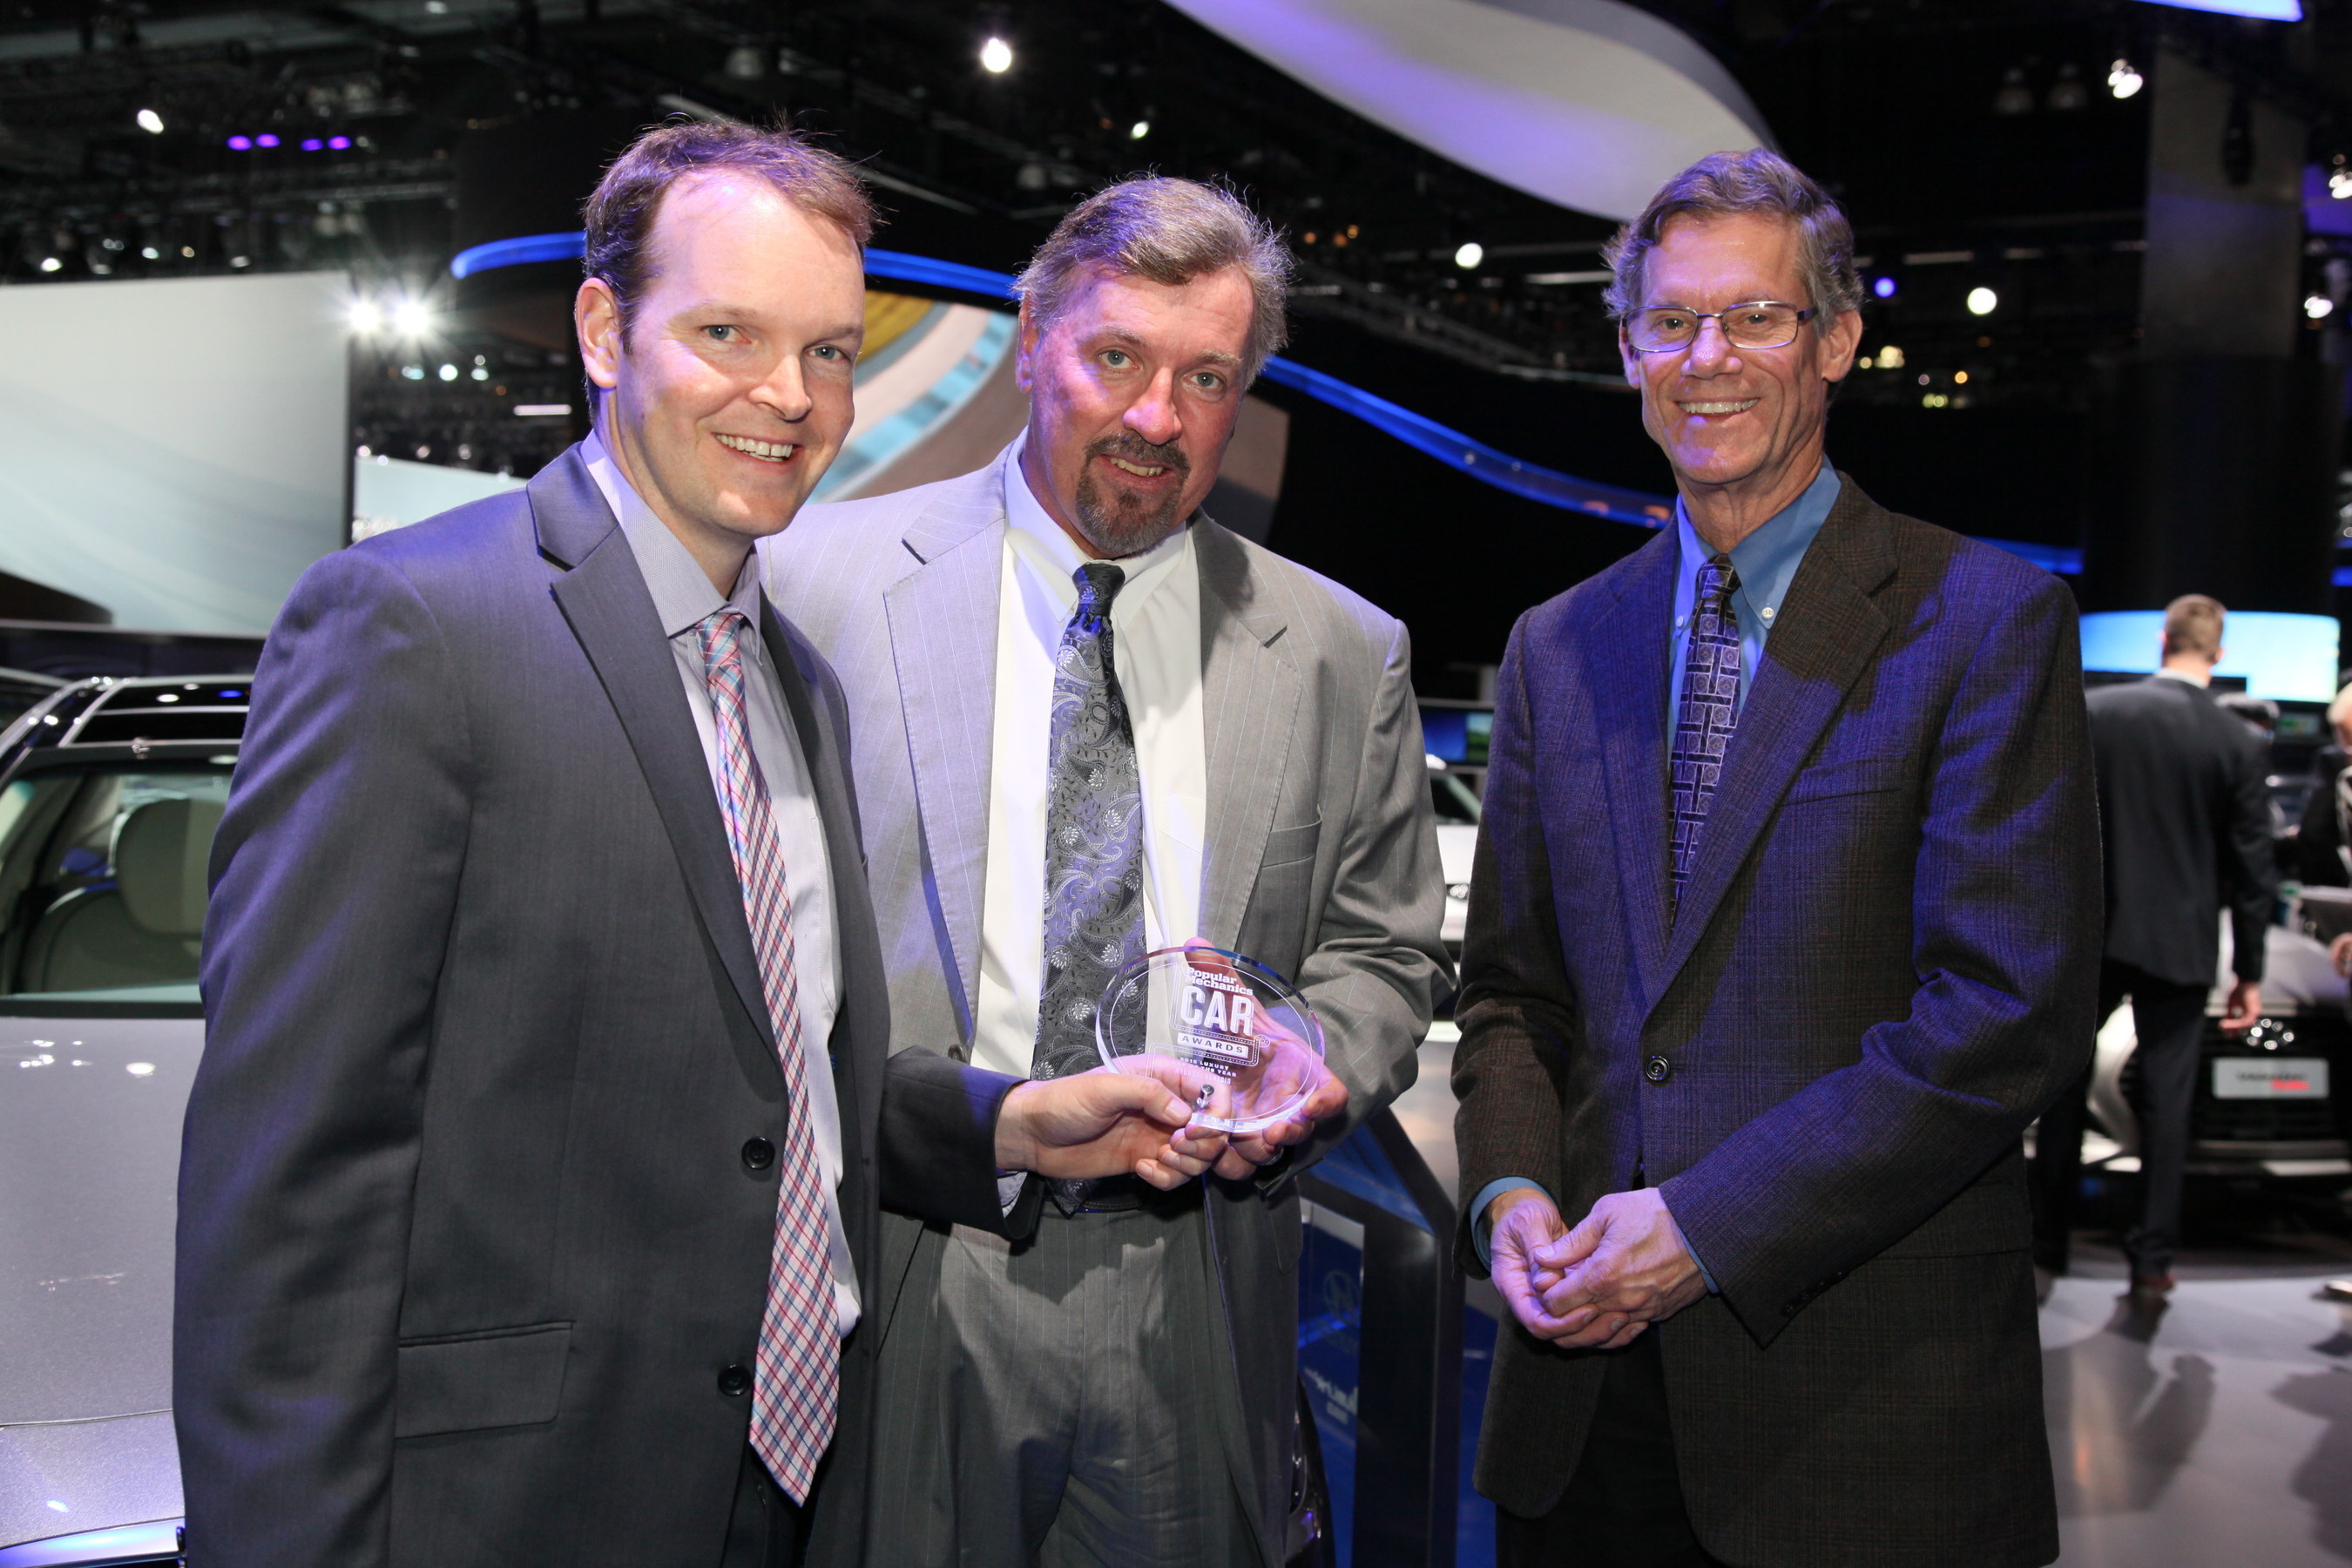 Ezra Dyer, automotive editor, Popular Mechanics, presents the Popular Mechanics "Luxury Car of the Year" award to Dave Zuchowski, president and CEO, Hyundai Motor America (center) and Mike O'Brien, vice president, corporate and product planning, Hyundai Motor America.